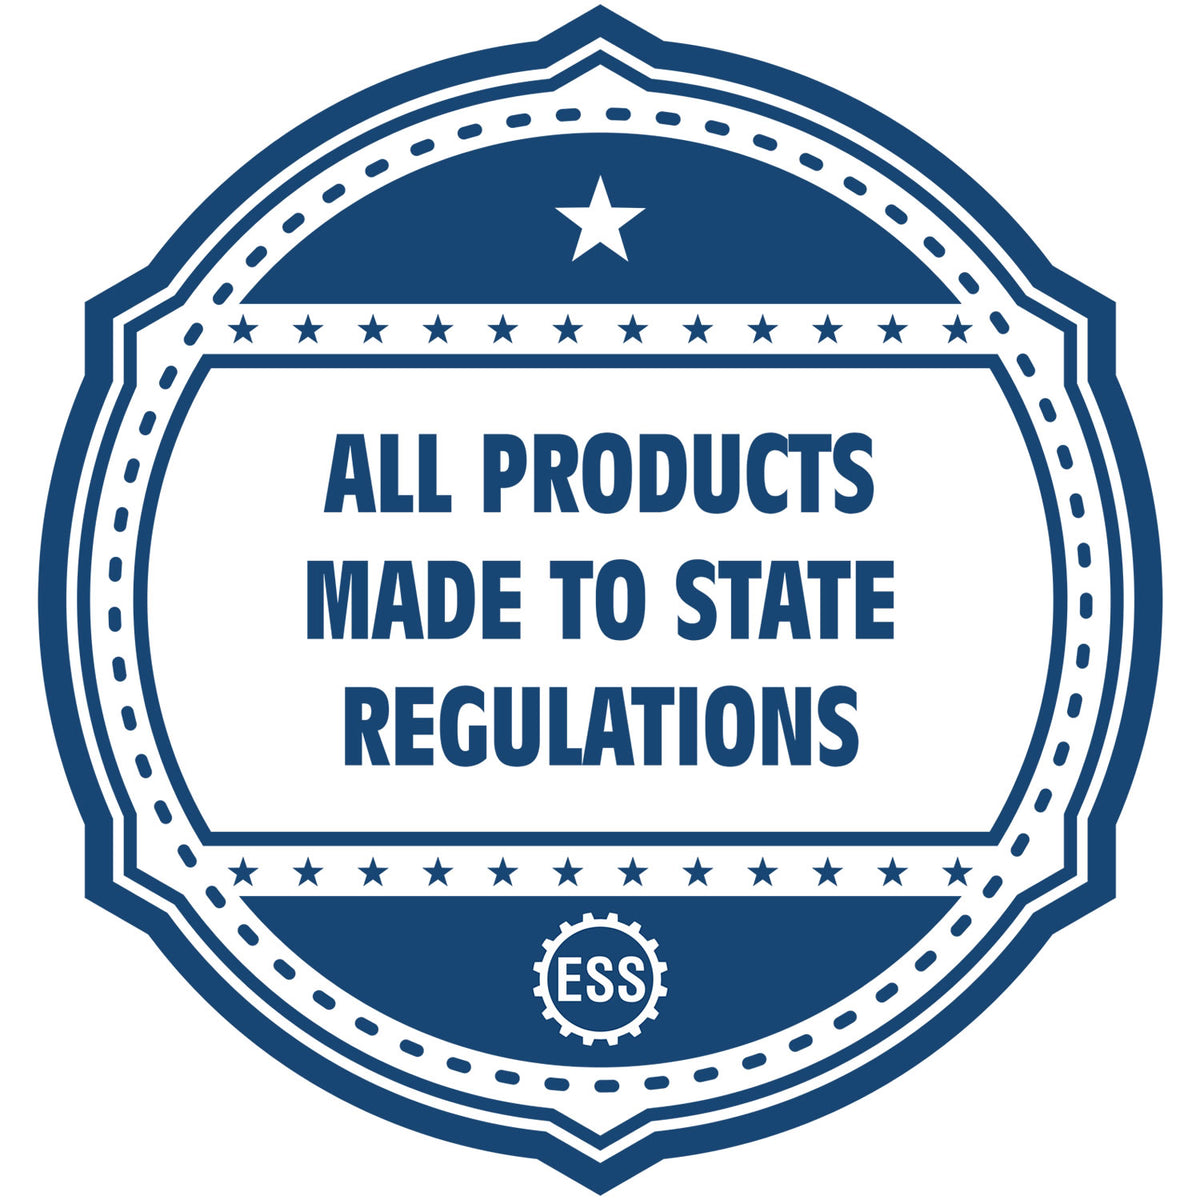 A blue icon or badge for the Gift Oklahoma Engineer Seal showing that this product is made in compliance with state regulations.